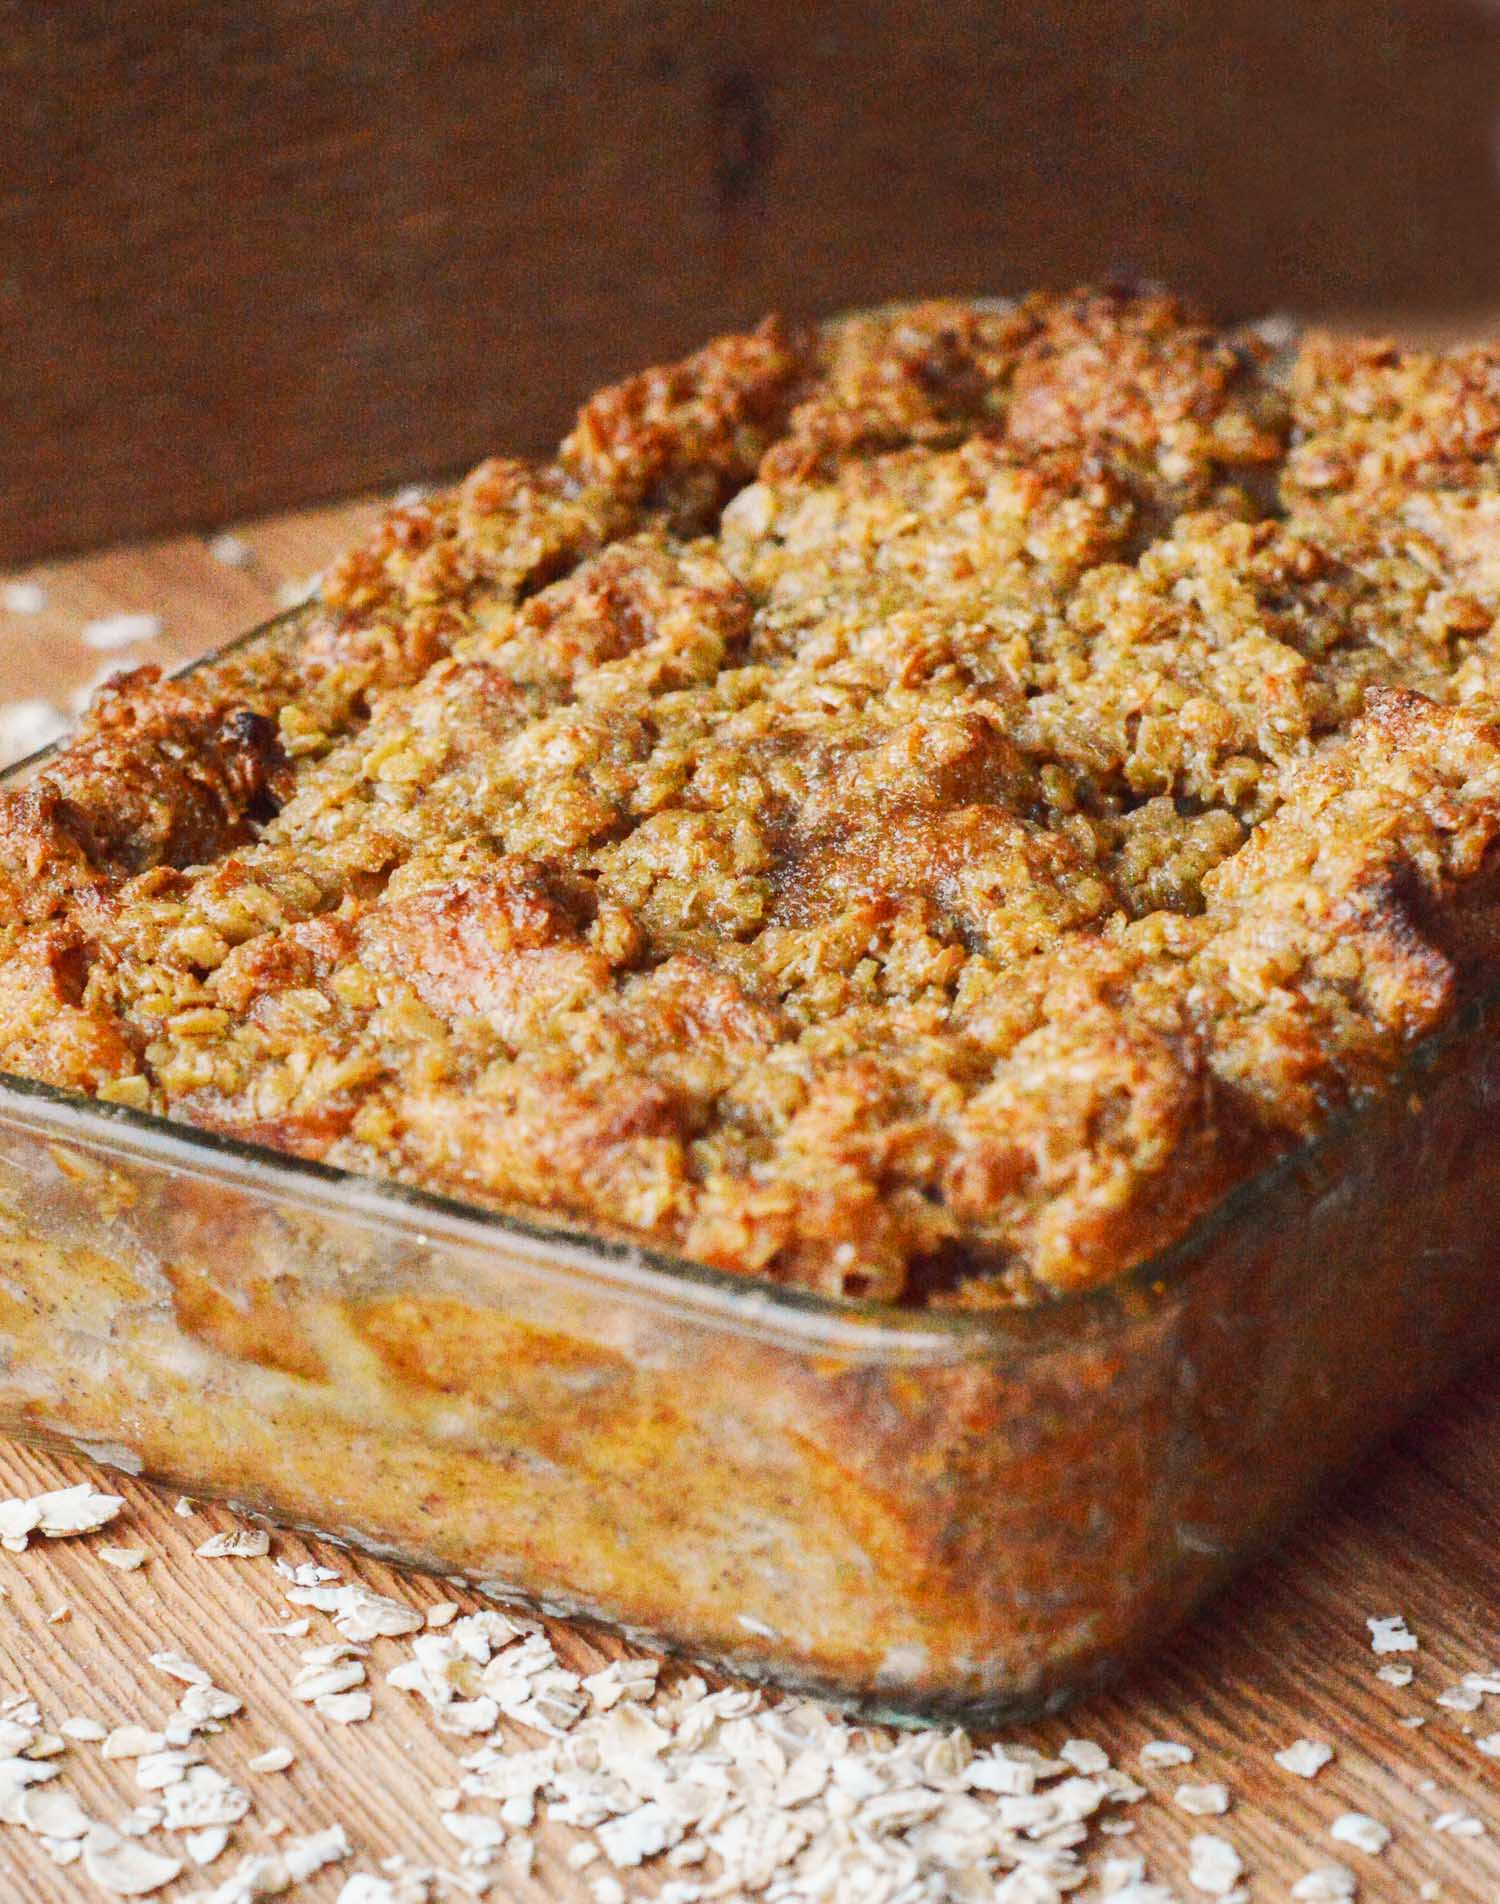 A glass pan of French toast casserole with some oatmeal scattered around it.